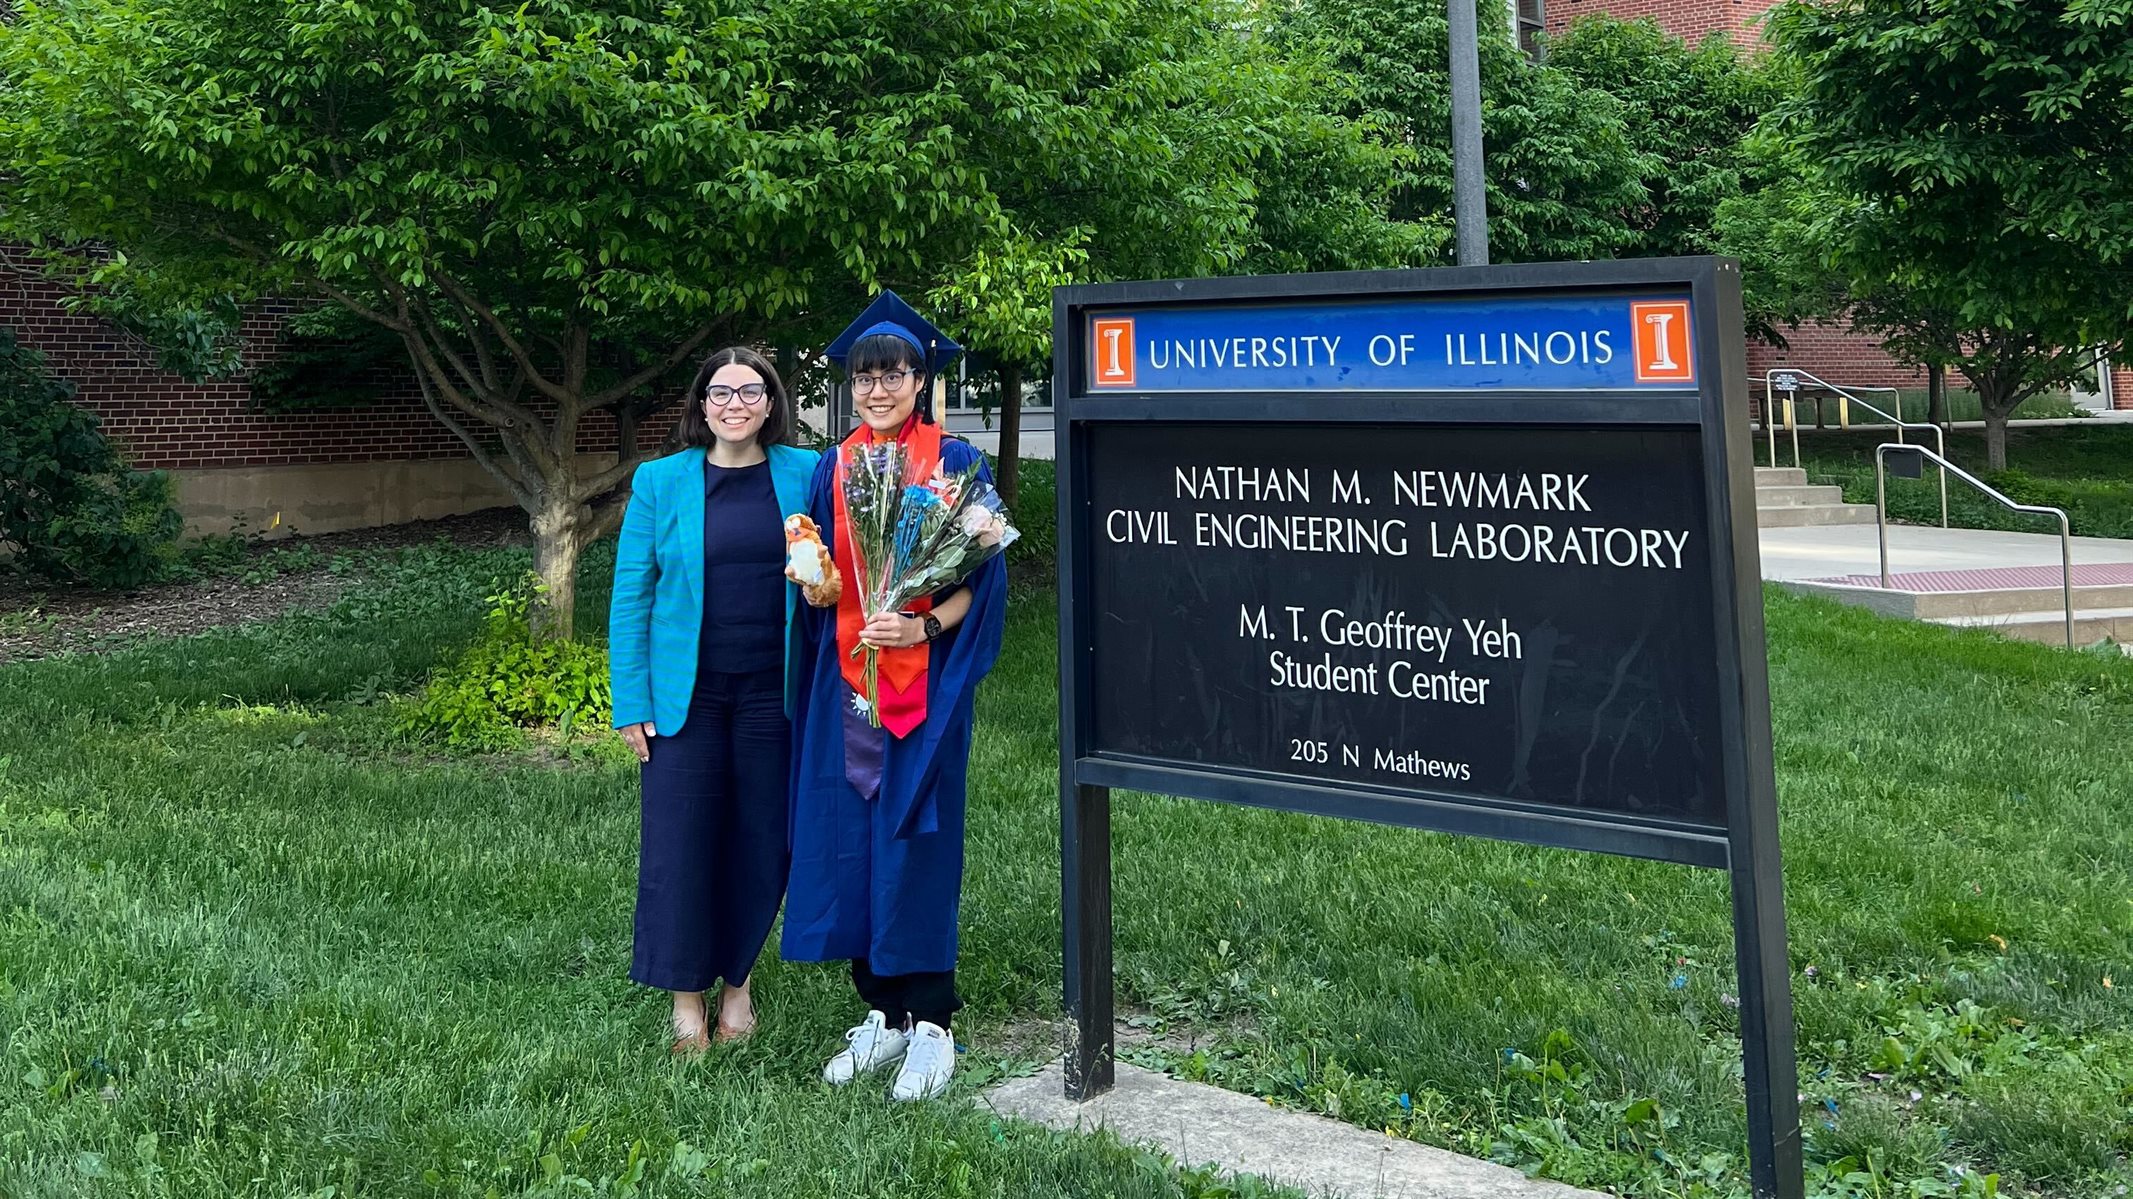 Eleftheria (Ria) Kontou, University of Illinois Urbana-Champaign assistant professor, poses with Yen-Chu Wu, UIUC master&rsquo;s student, outside the Nathan M. Newmark Civil Engineering Laboratory. &ldquo;Mentoring my students who took part in this initiative was one of my favorite parts of this study,&rdquo; Kontou said. &ldquo;You can see students grow, take up more responsibilities, think independently and contribute to the transportation science literature.&rdquo;